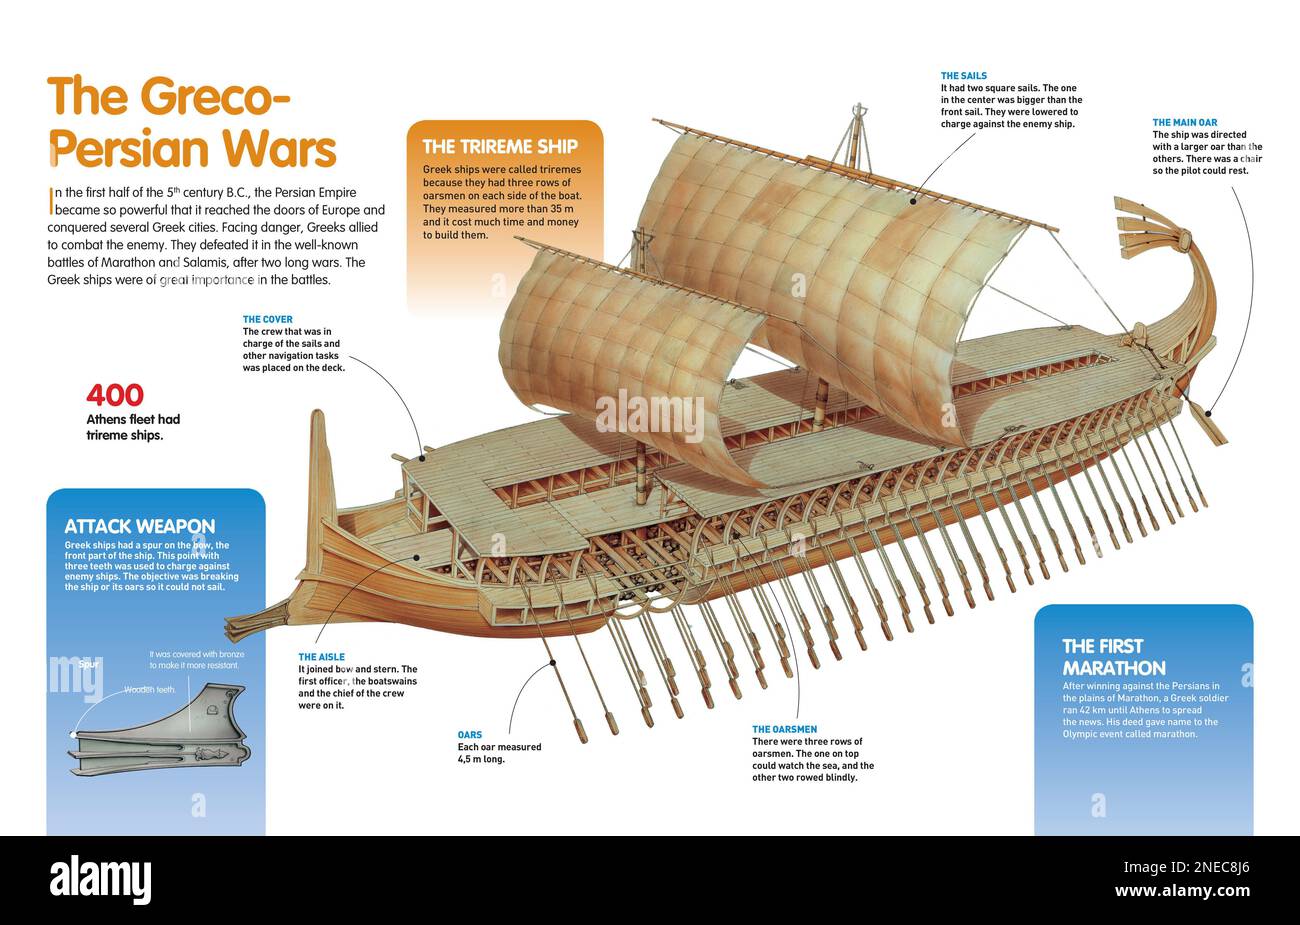 Infographic that describes de trireme ship that the Greeks used during the Persian Wars against the Persians in the 5th century B.C. [QuarkXPress (.qxp); Adobe InDesign (.indd); 4960x3188]. Stock Photo